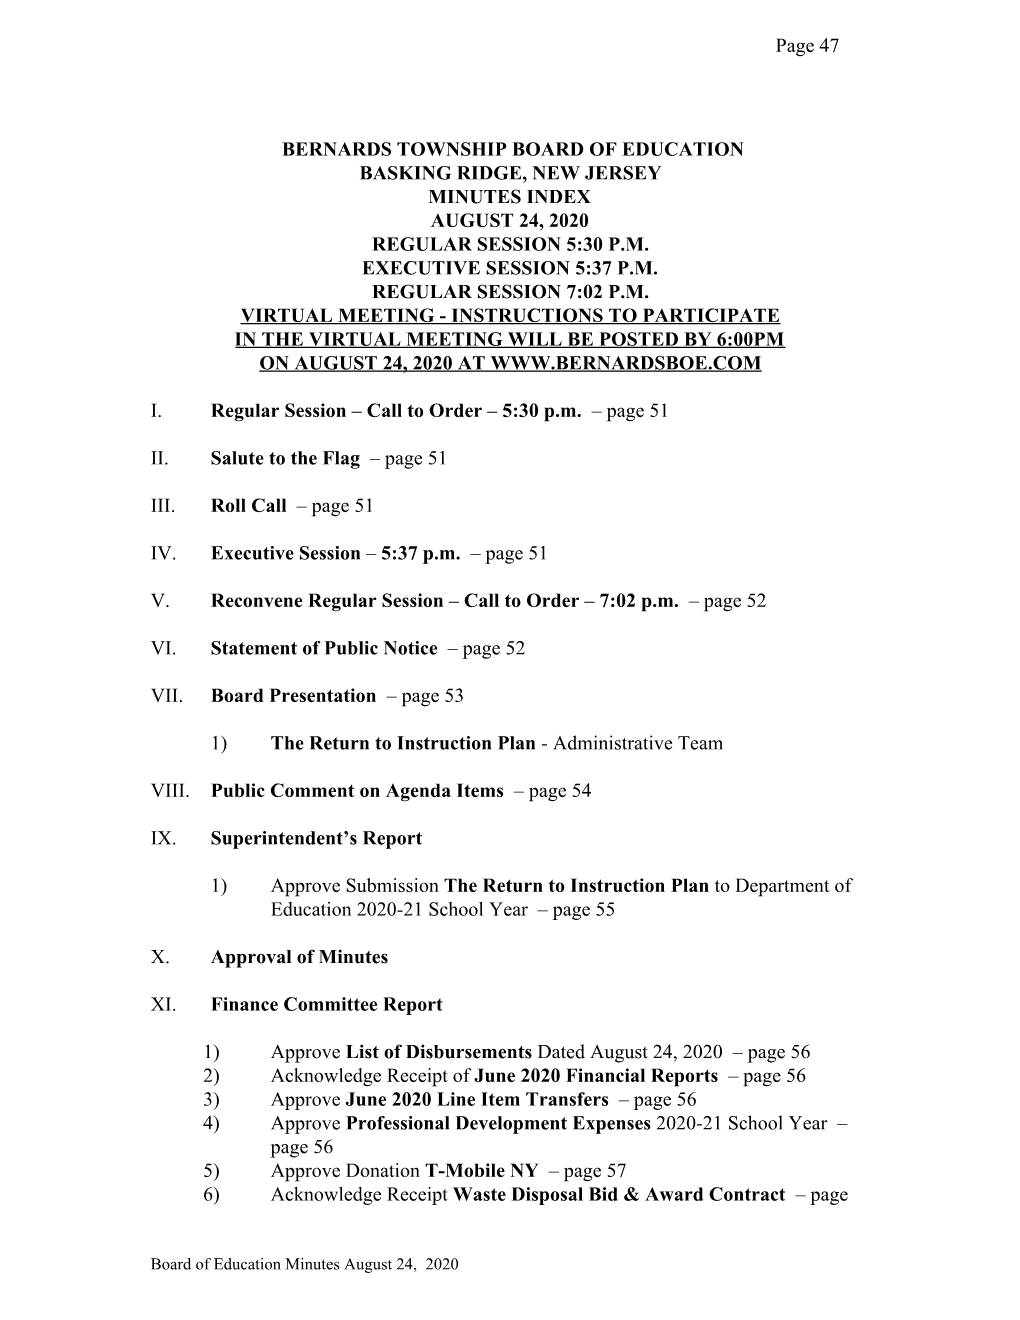 Page 47 BERNARDS TOWNSHIP BOARD of EDUCATION BASKING RIDGE, NEW JERSEY MINUTES INDEX AUGUST 24, 2020 REGULAR SESSION 5:30 P.M. E